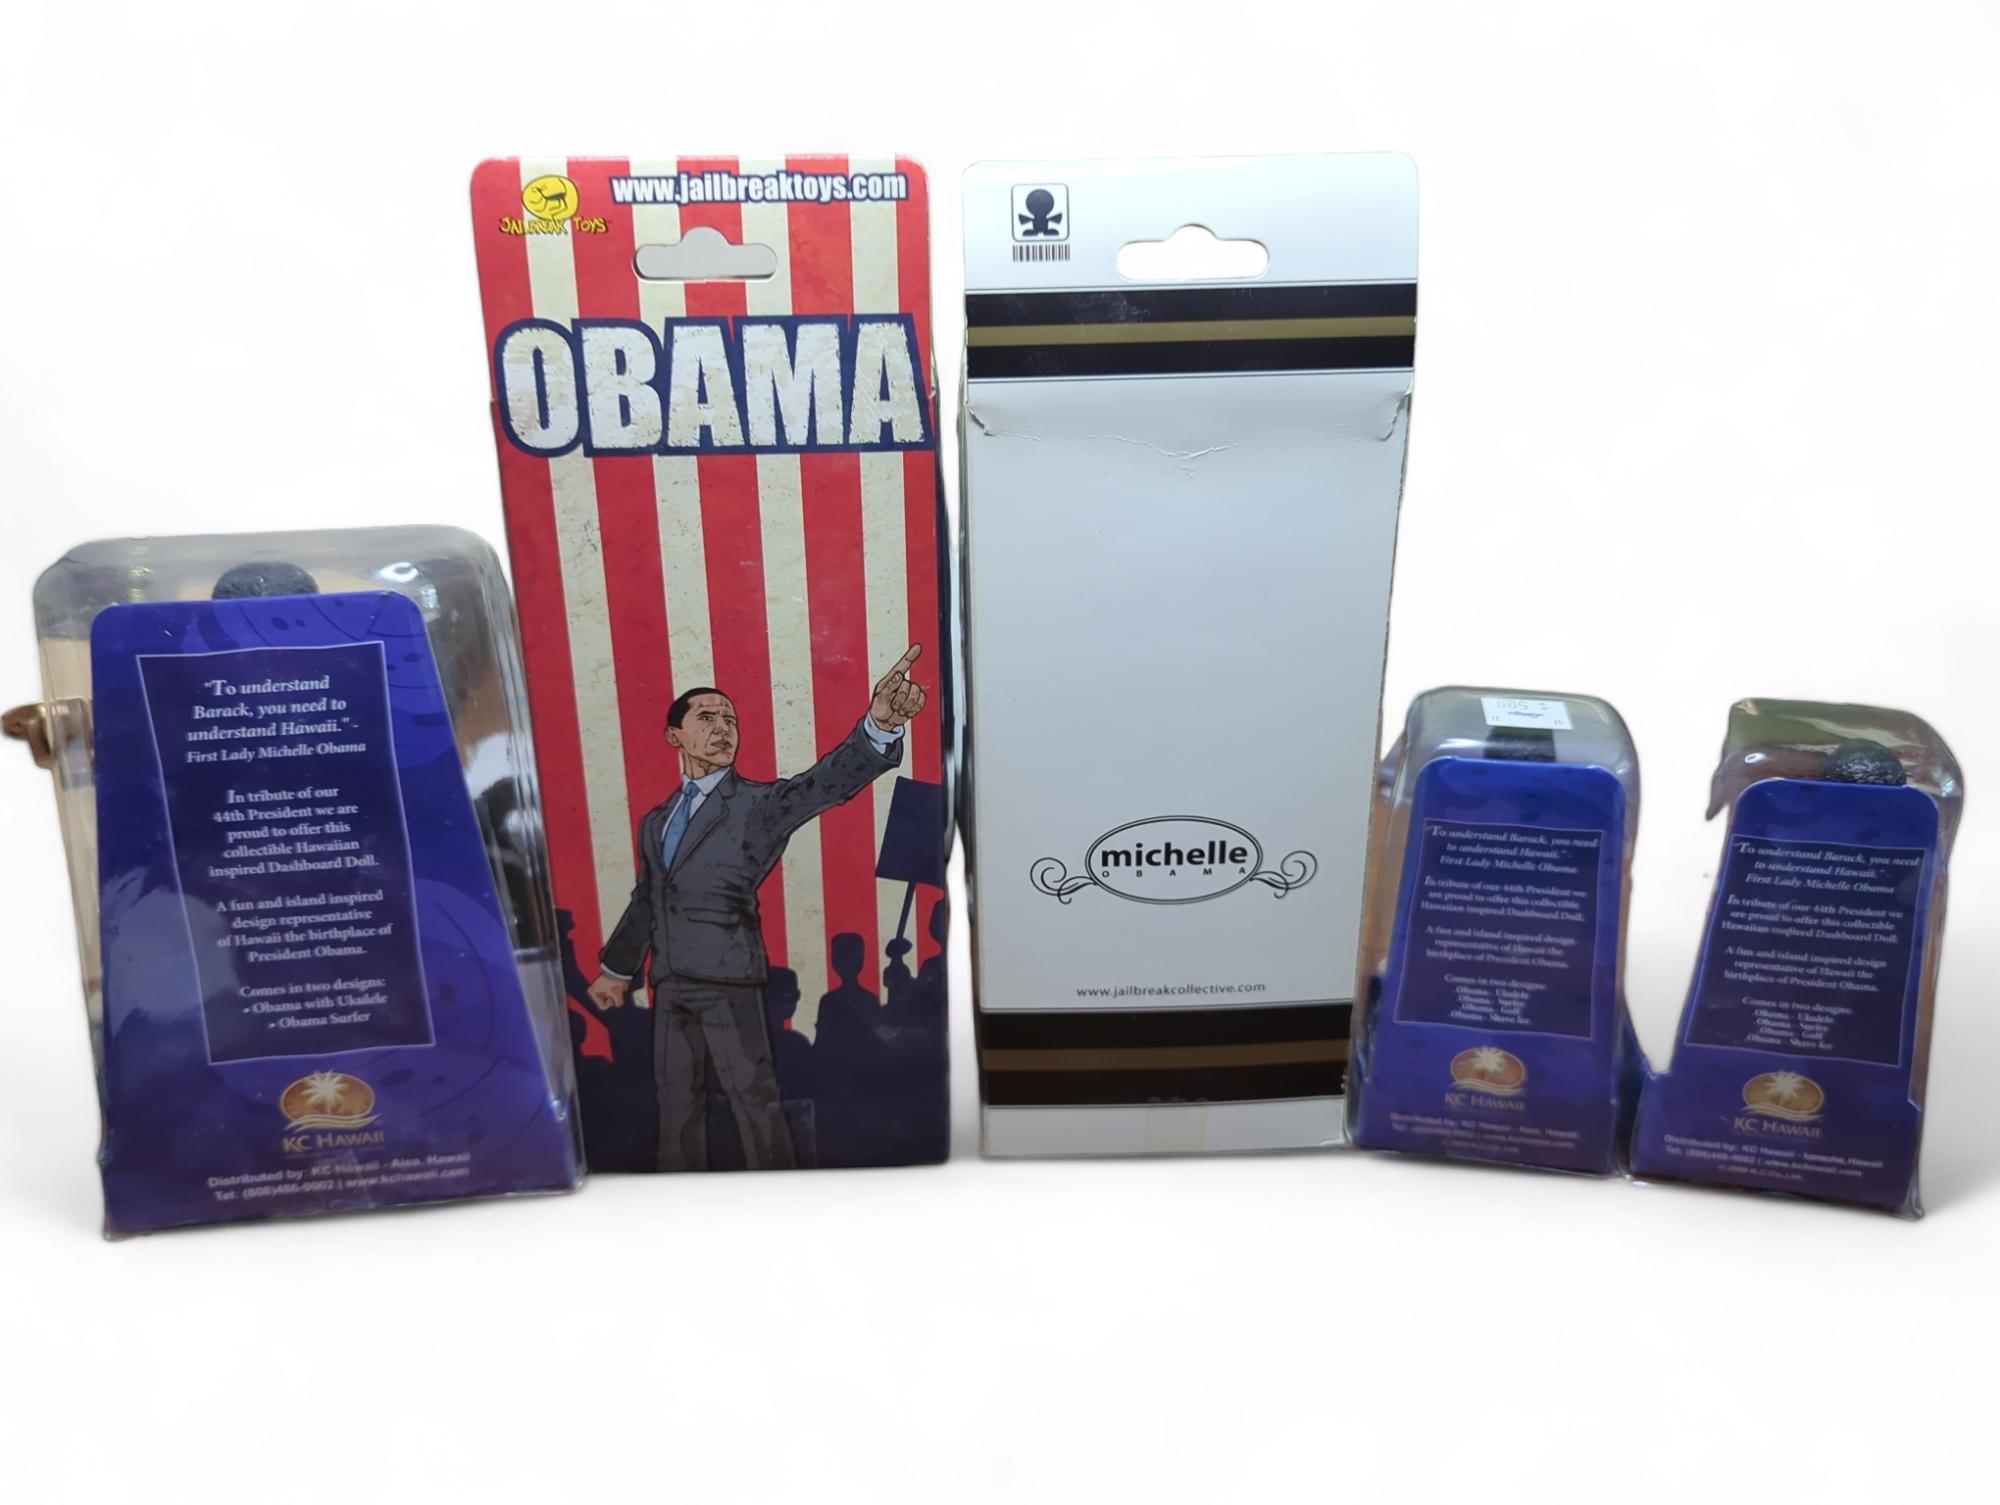 Barack and Michelle Obama action figures and bobblehead dolls